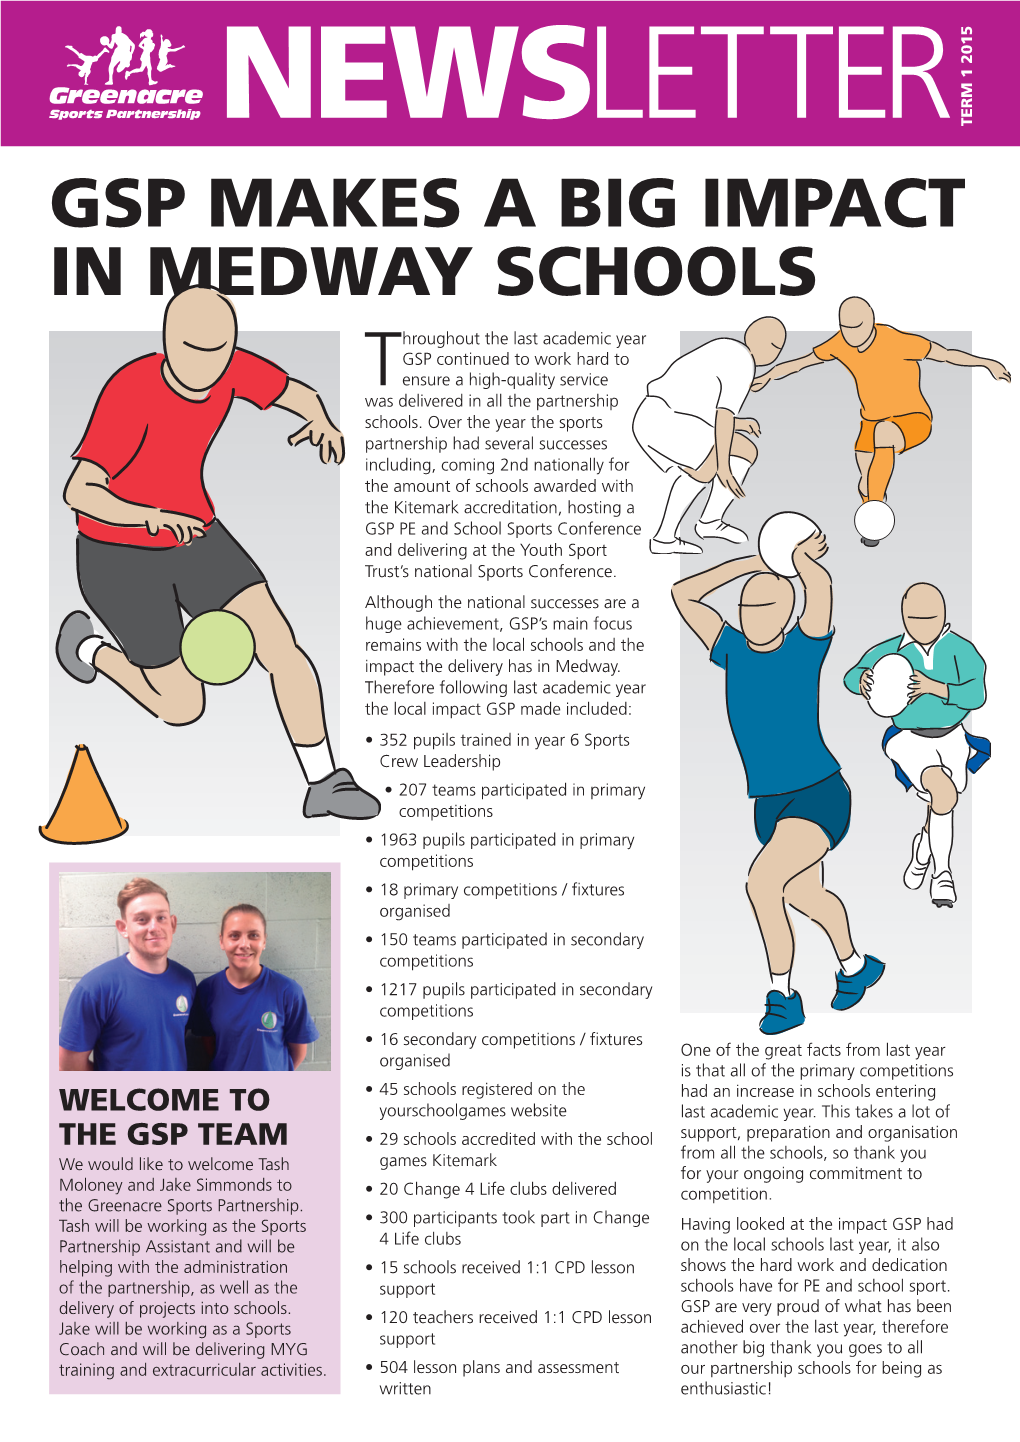 Gsp Makes a Big Impact in Medway Schools